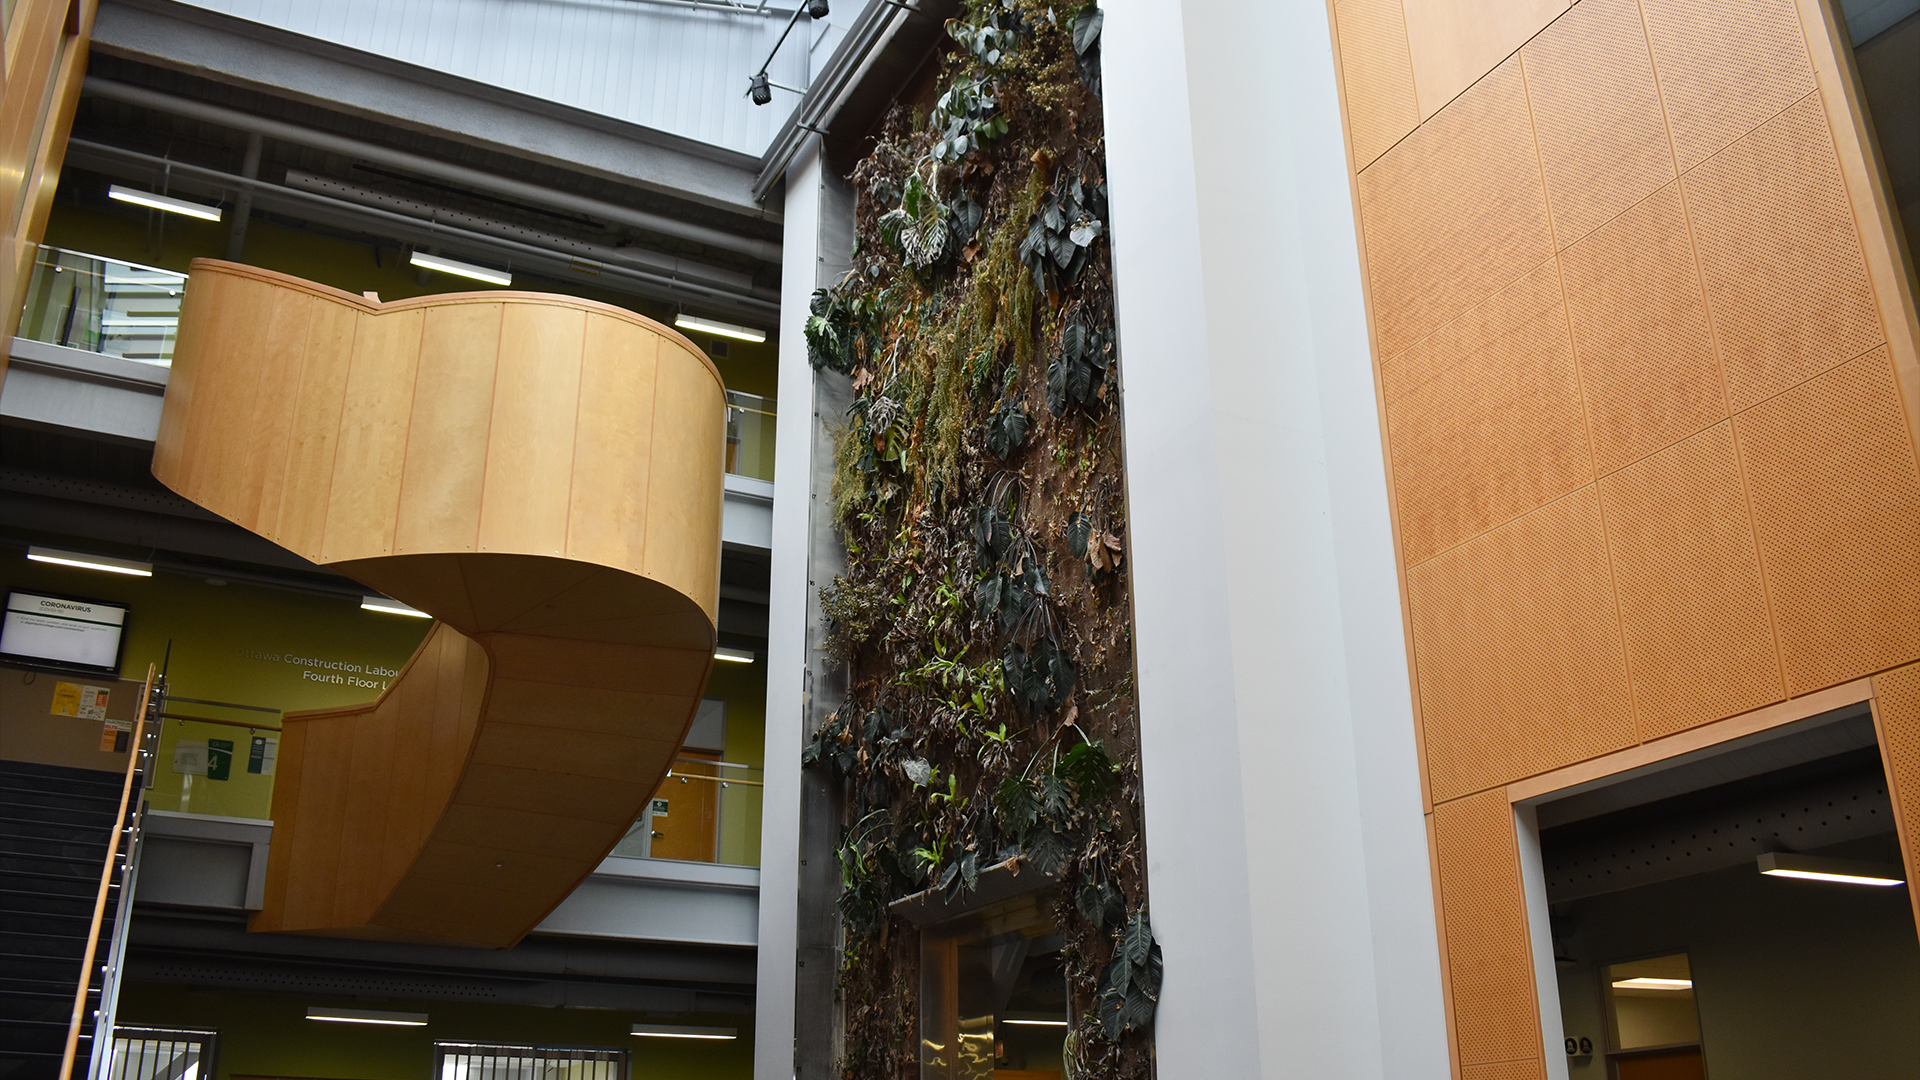 The Bio Wall - known also as the living wall - is one of Algonquin College's most unique displays. It will now have to be restored and may take many months of hard work.